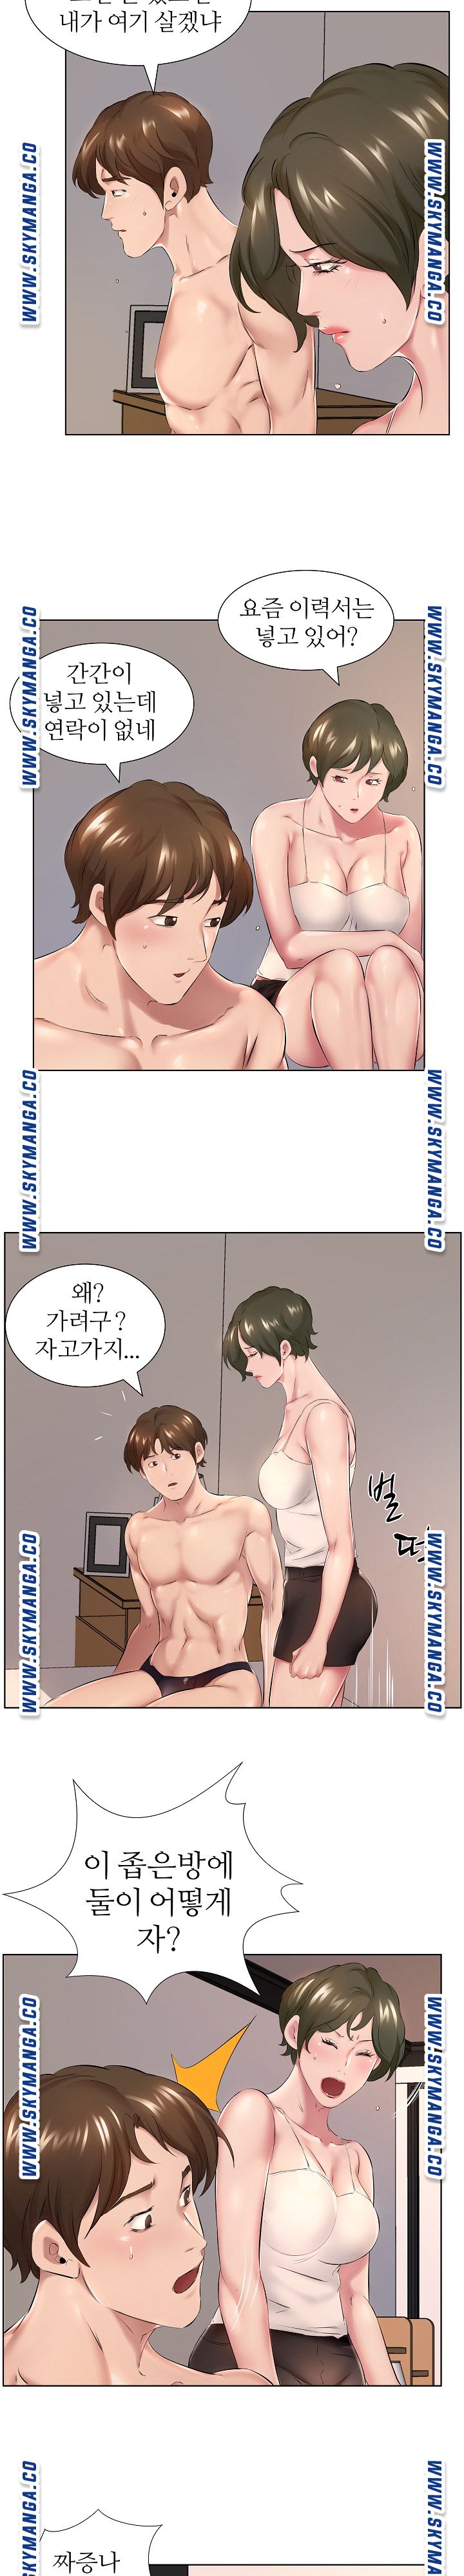 One Room Hotel Raw - Chapter 1 Page 10